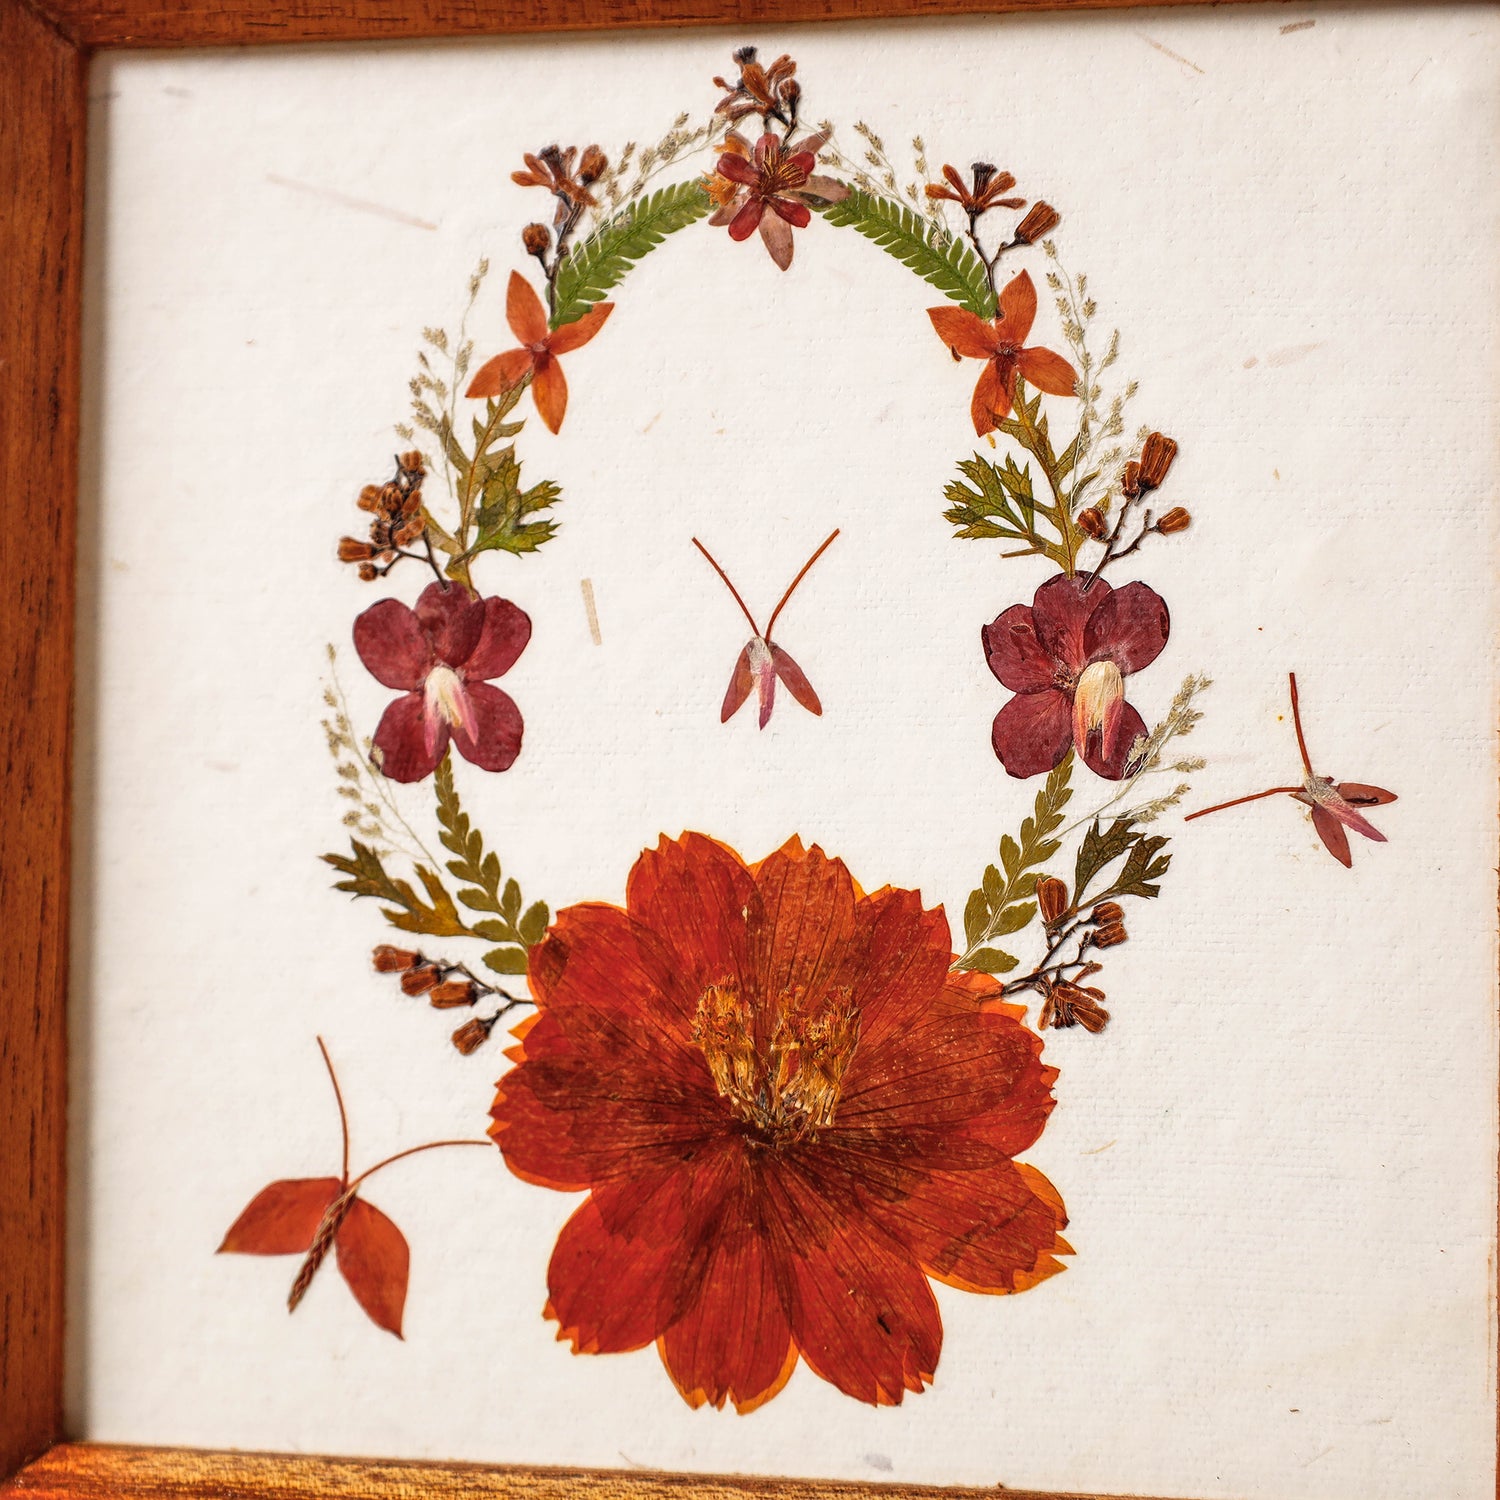 Classic Natural Flower Art Work Wall Hanging Wooden Frame (6 x 6 in)